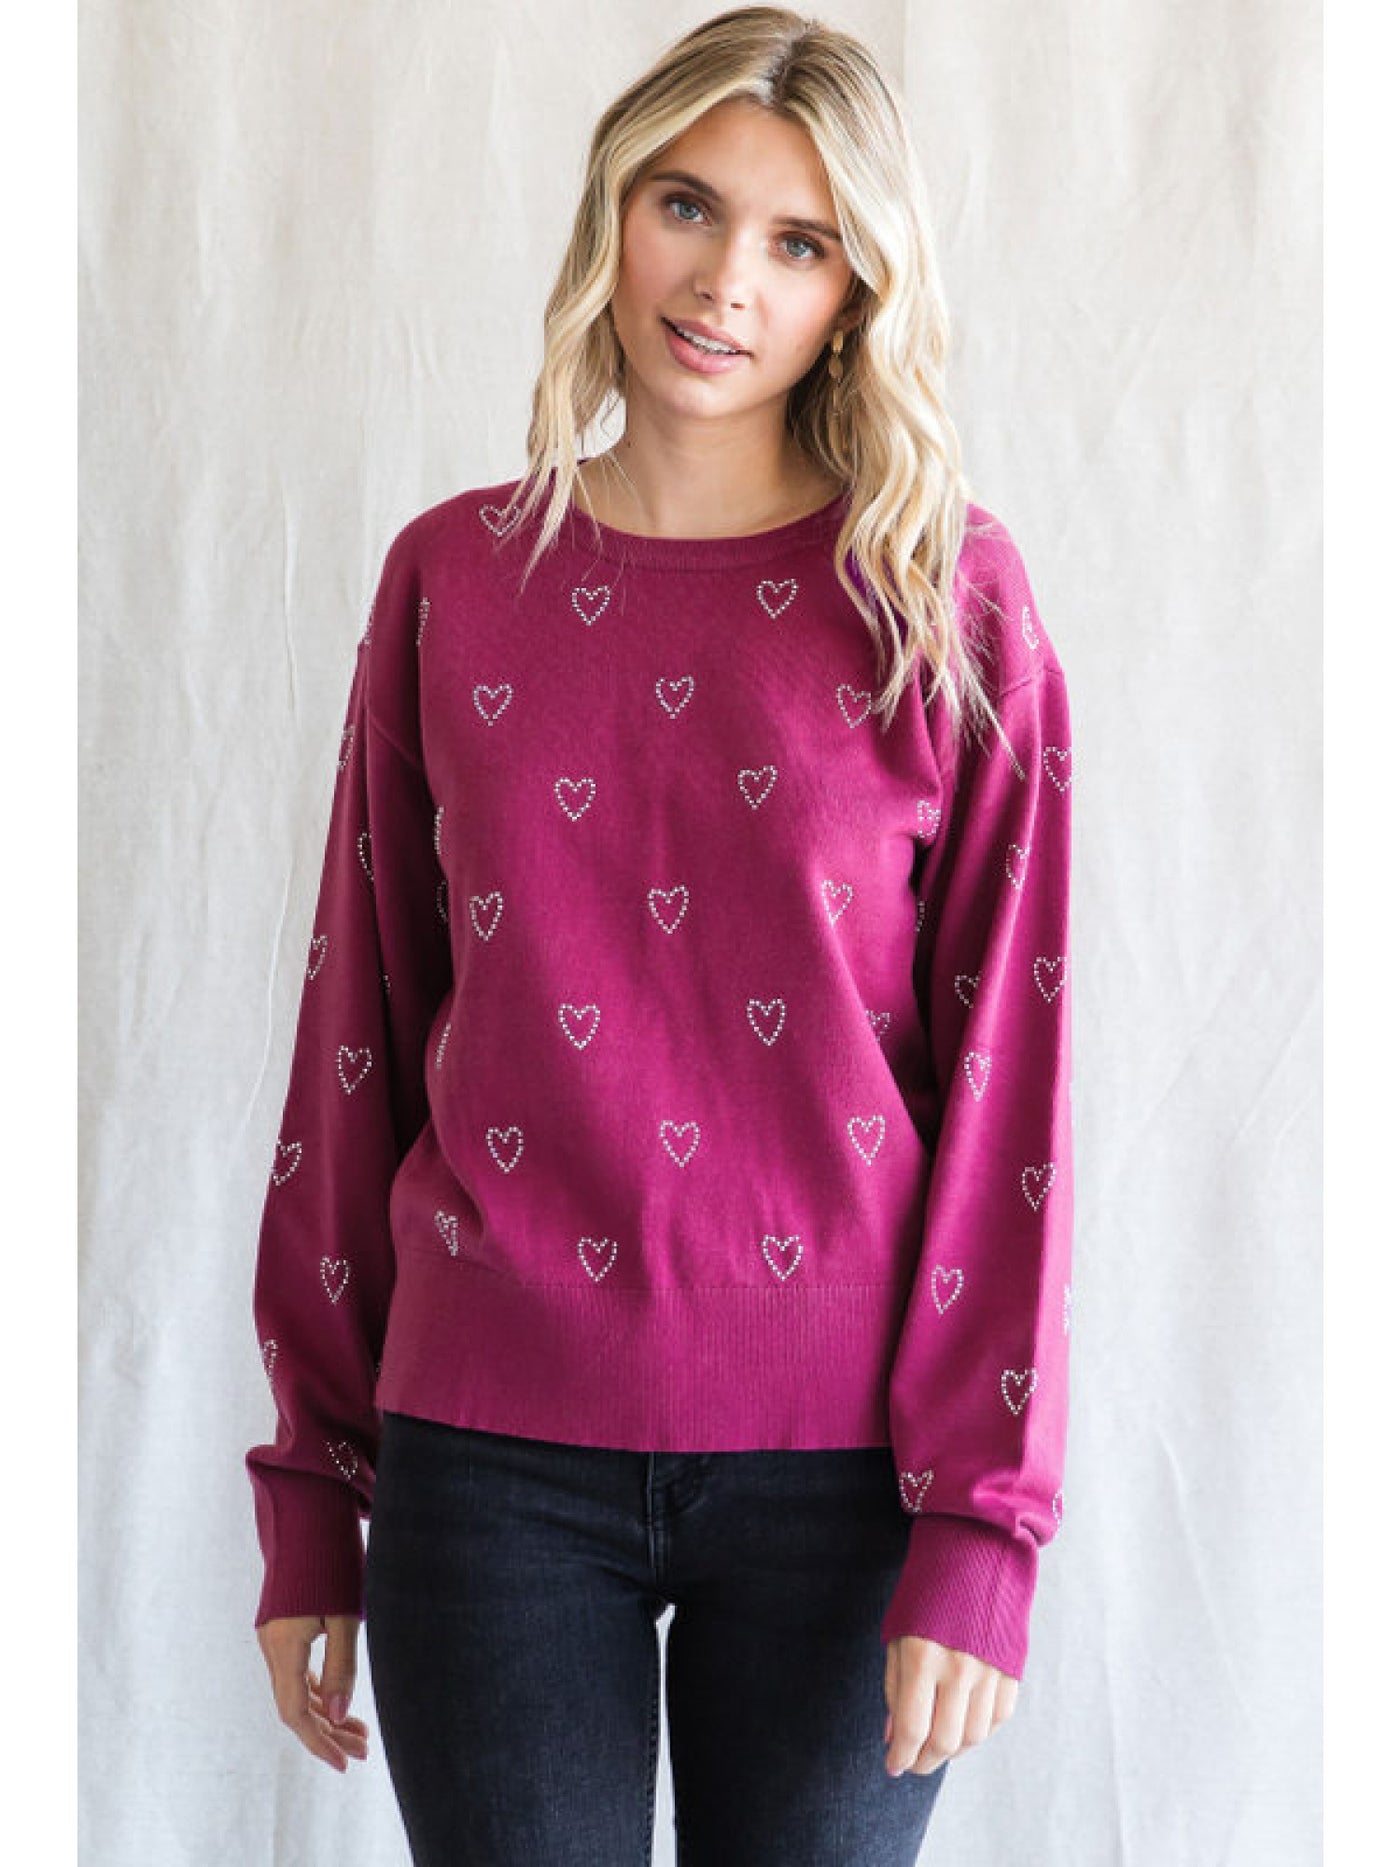 Magenta Cubic Heart Pattern Knit Pullover Sweater FINAL SALE